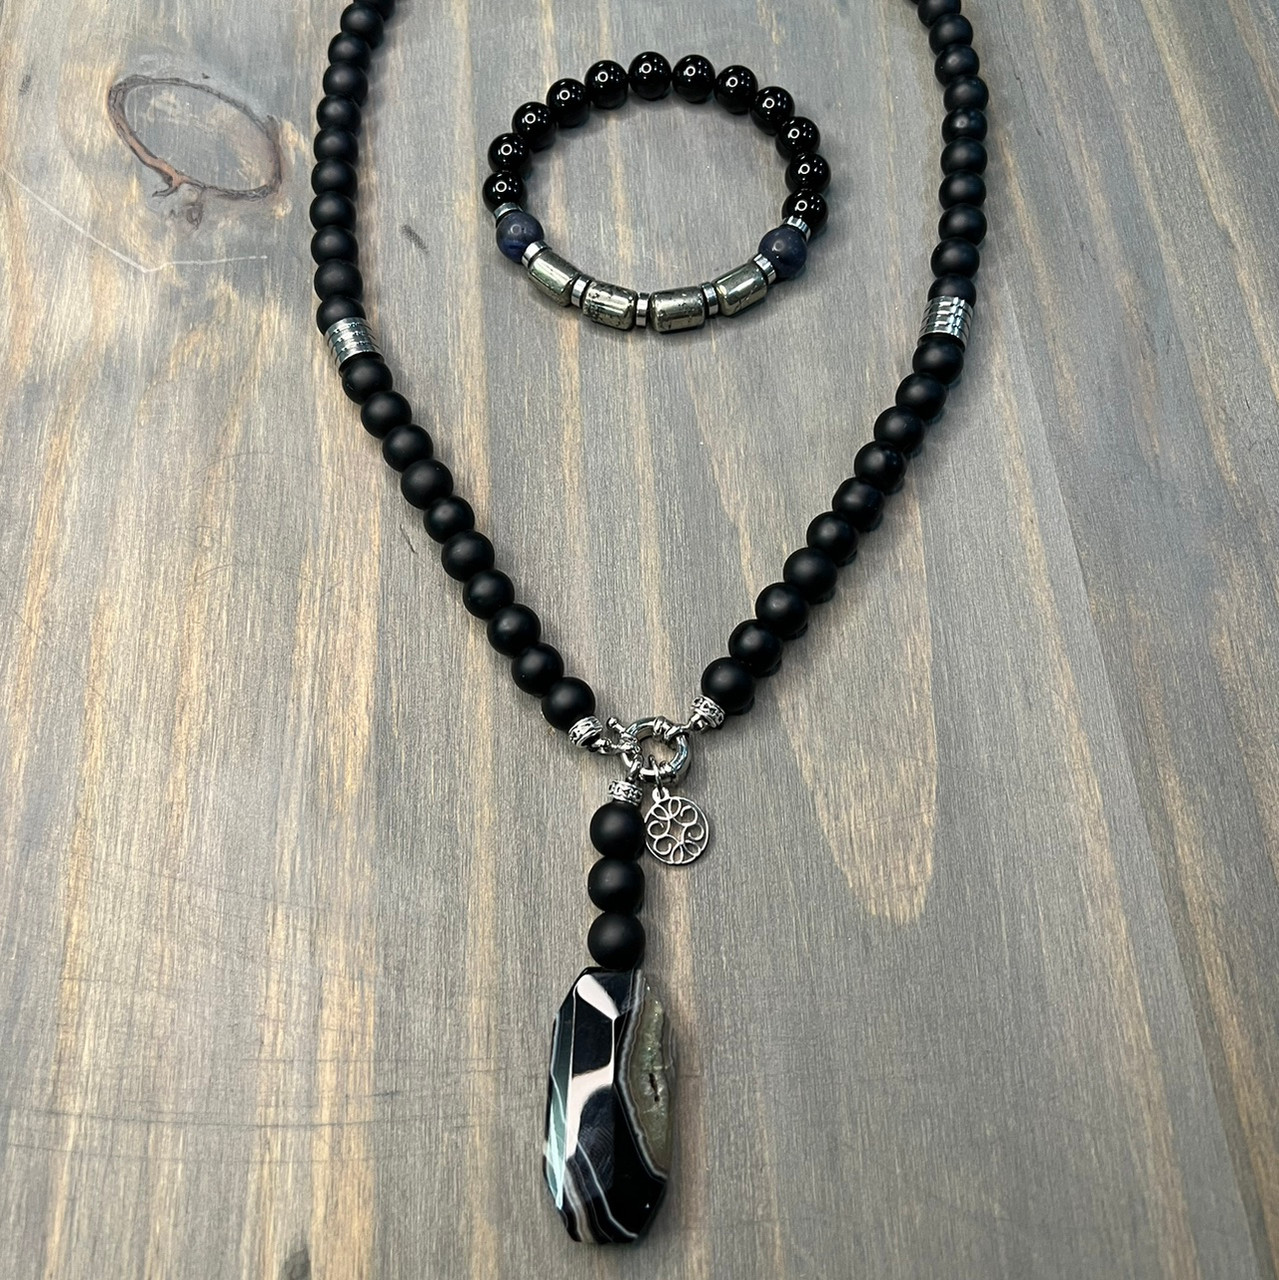 Buy Mens Necklace, Black Onyx Pendant Necklace Set Silver Jewellery Gift  Sets Necklaces for Men Mens Jewelry Gifts Silver Necklace Men Online in  India - Etsy